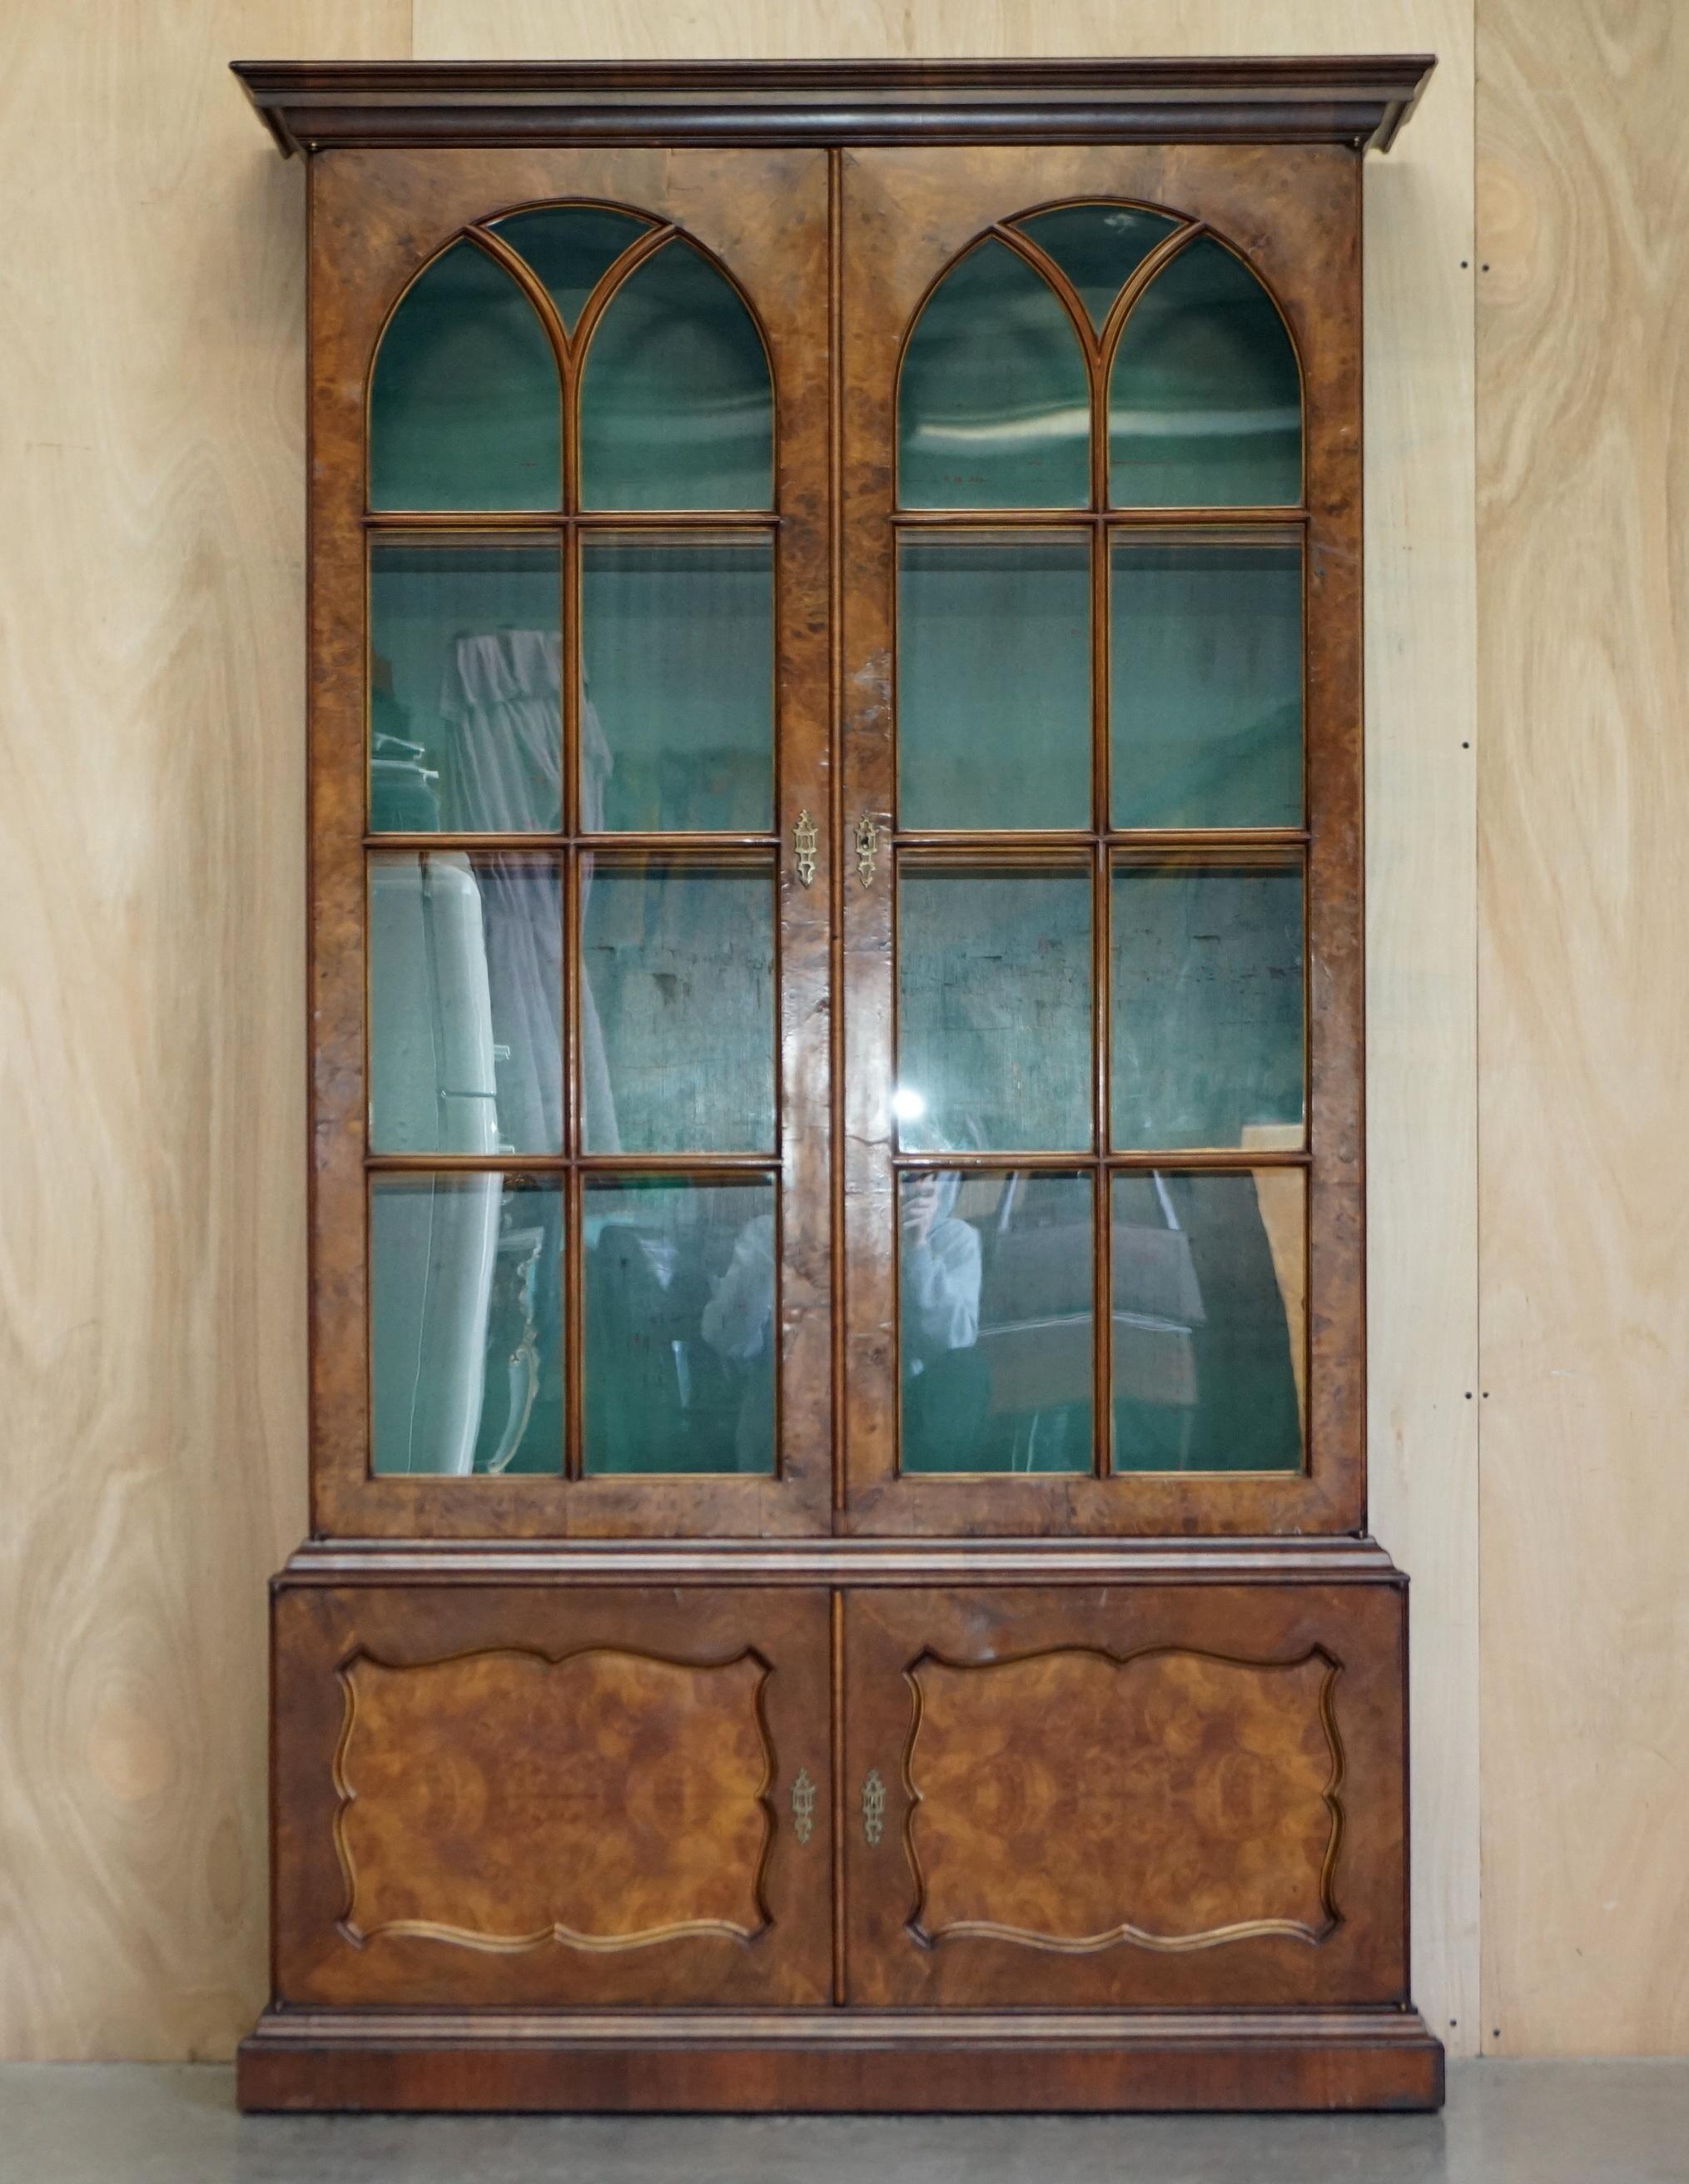 We are delighted to offer for sale this sublime circa 1880 antique Victorian burr walnut library bookcase with gothic style glazed doors.

The bookcase is exquisite, deigned for a library but naturally it can sit anywhere, it is finished in Burr